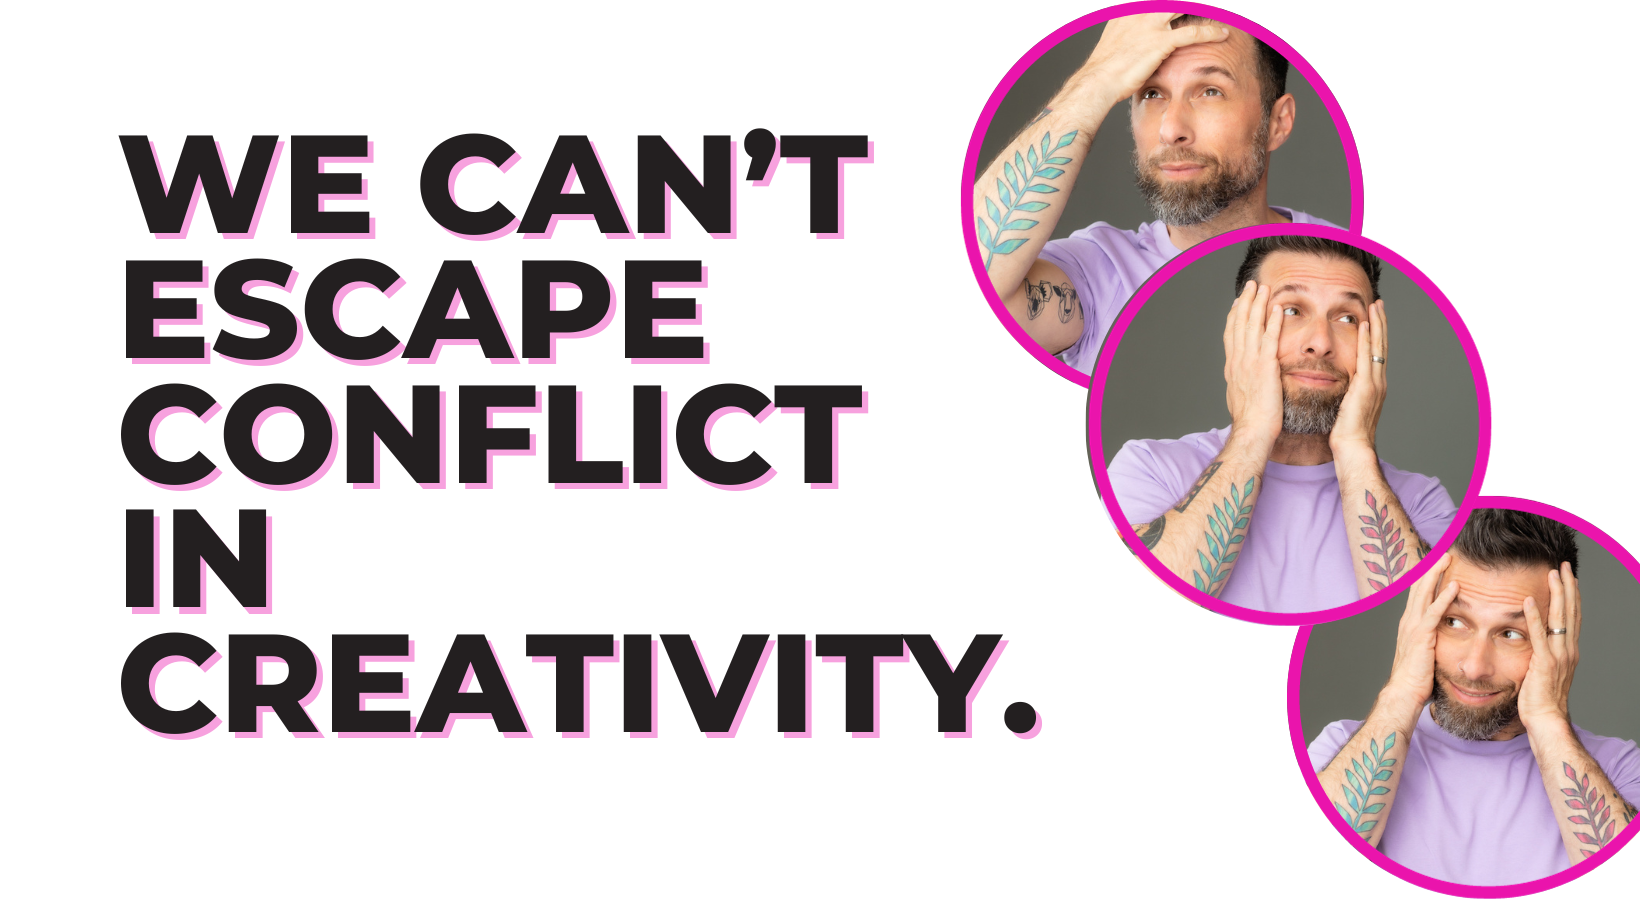 Without conflict there is no creativity.